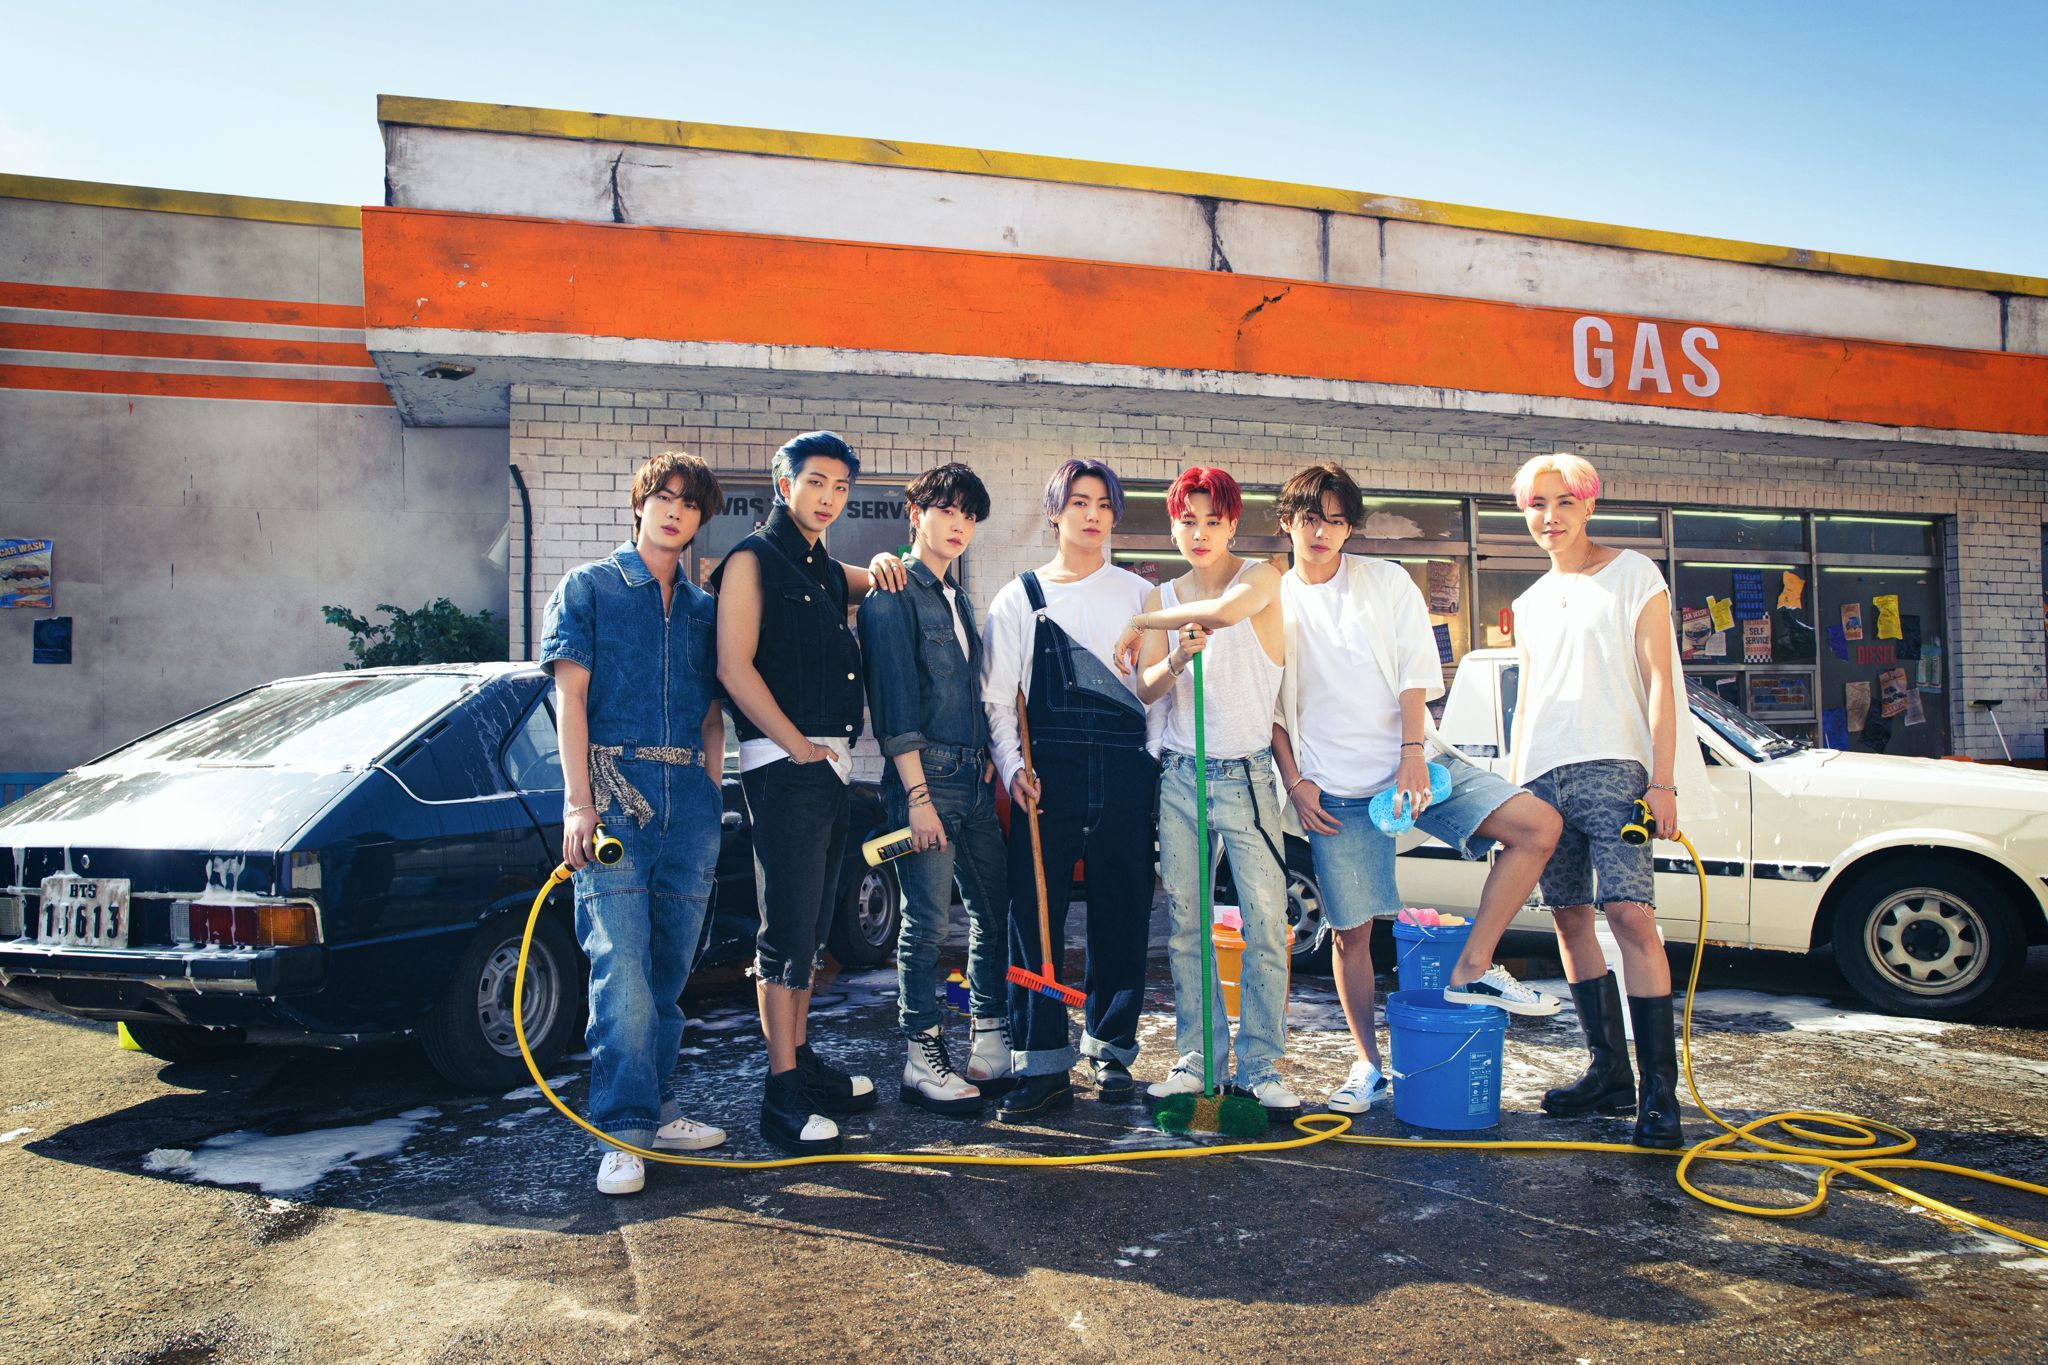 BTS' Released Version 3 Concept Photo for New Single “Permission to Dance” Now We Want To Wash Cars!